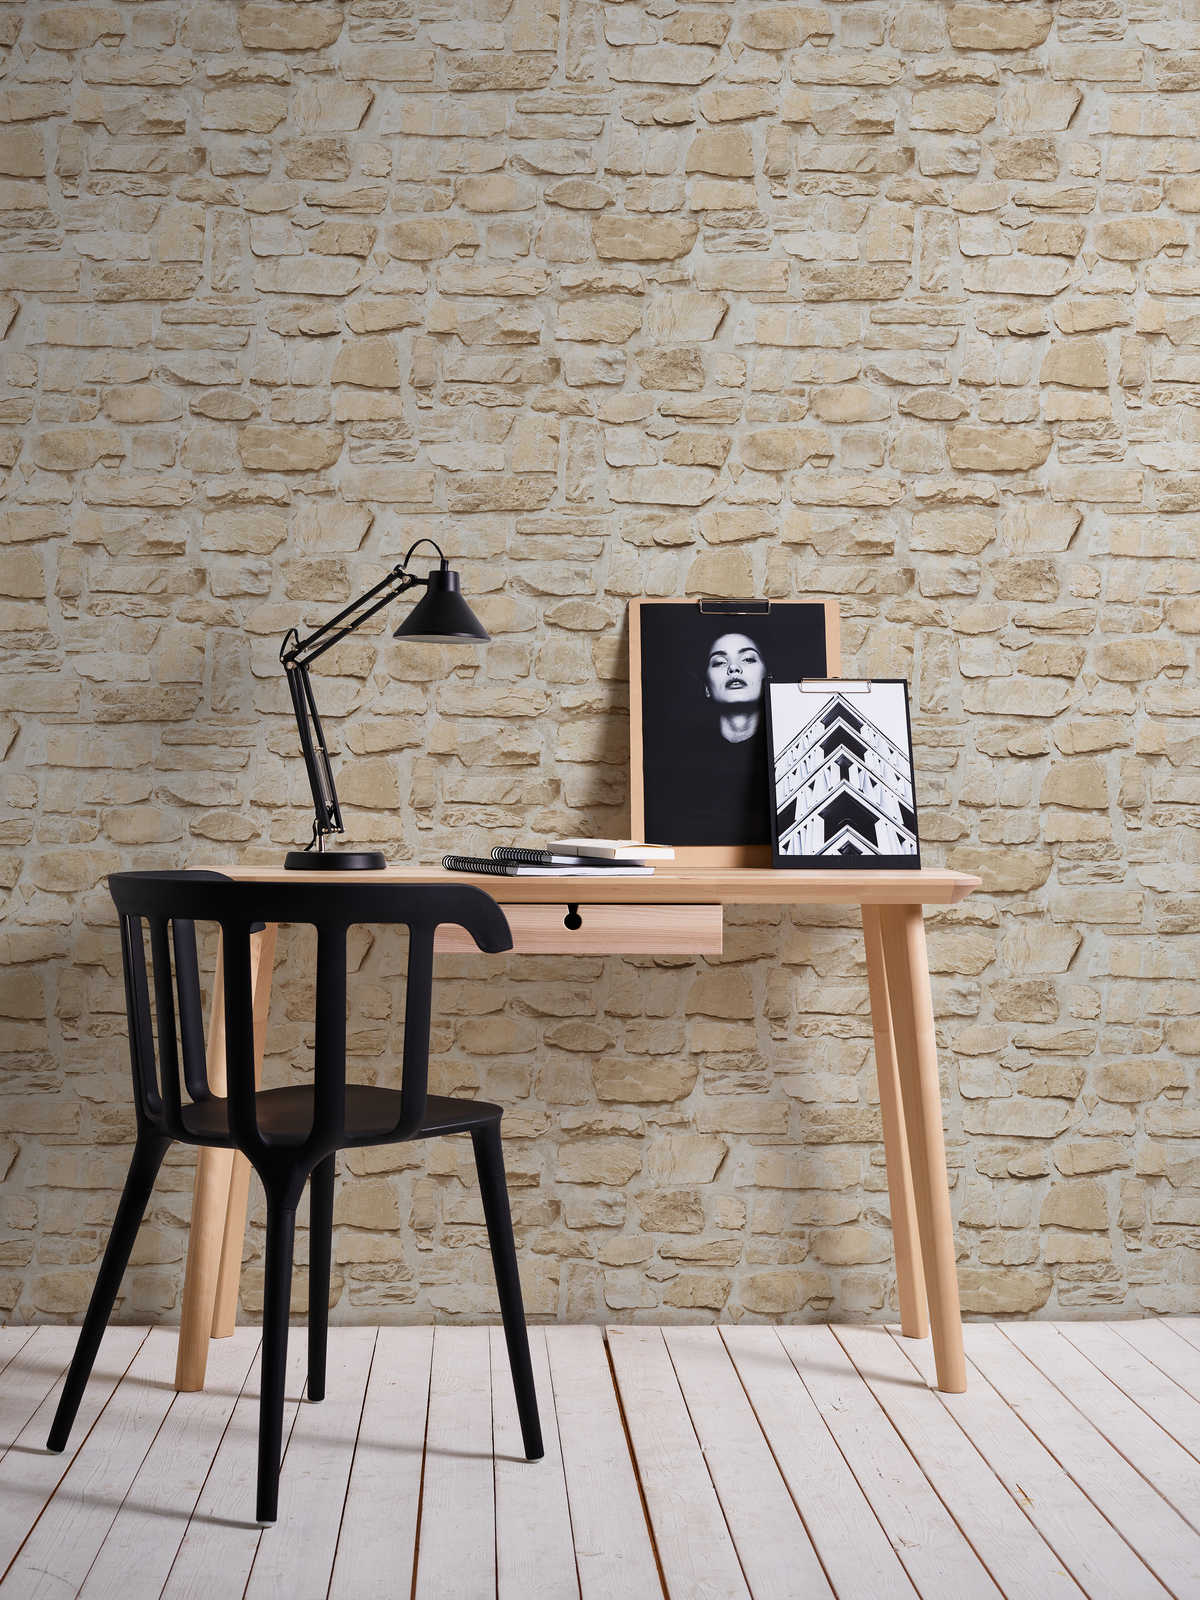             Self-adhesive wallpaper | natural stone wall in 3D look - beige
        